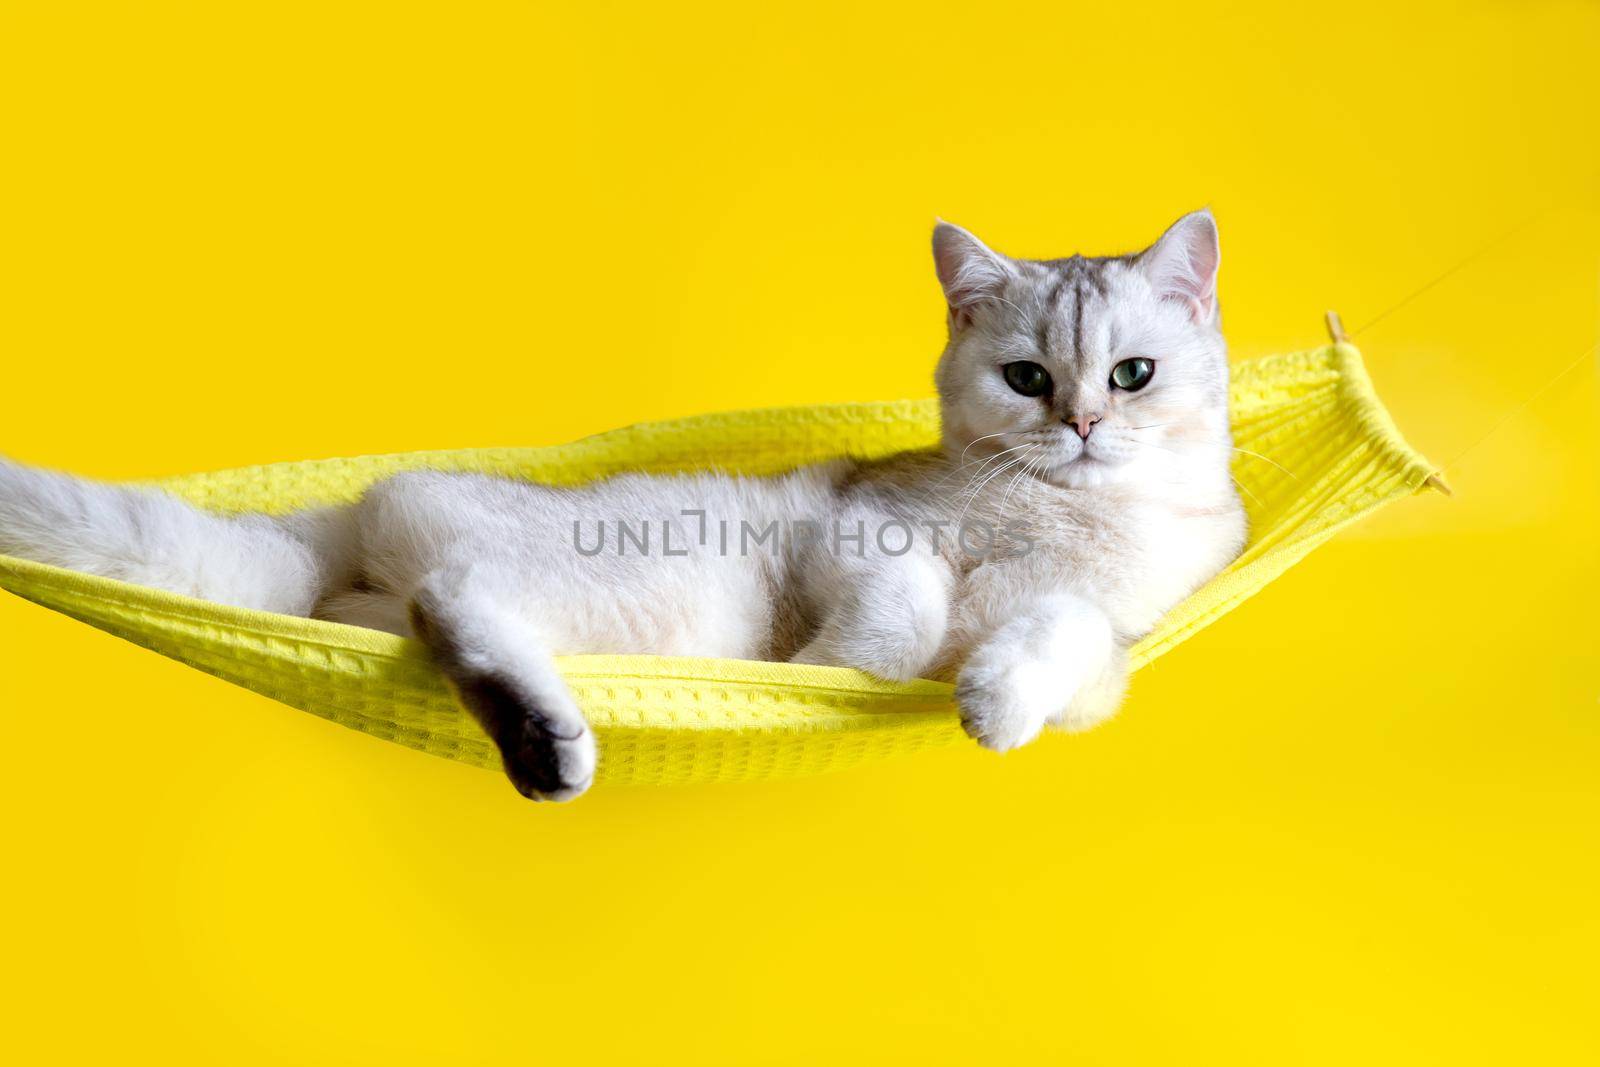 adorable white cat lie on yellow hammock isolated on yellow background. Close up. Copy space.